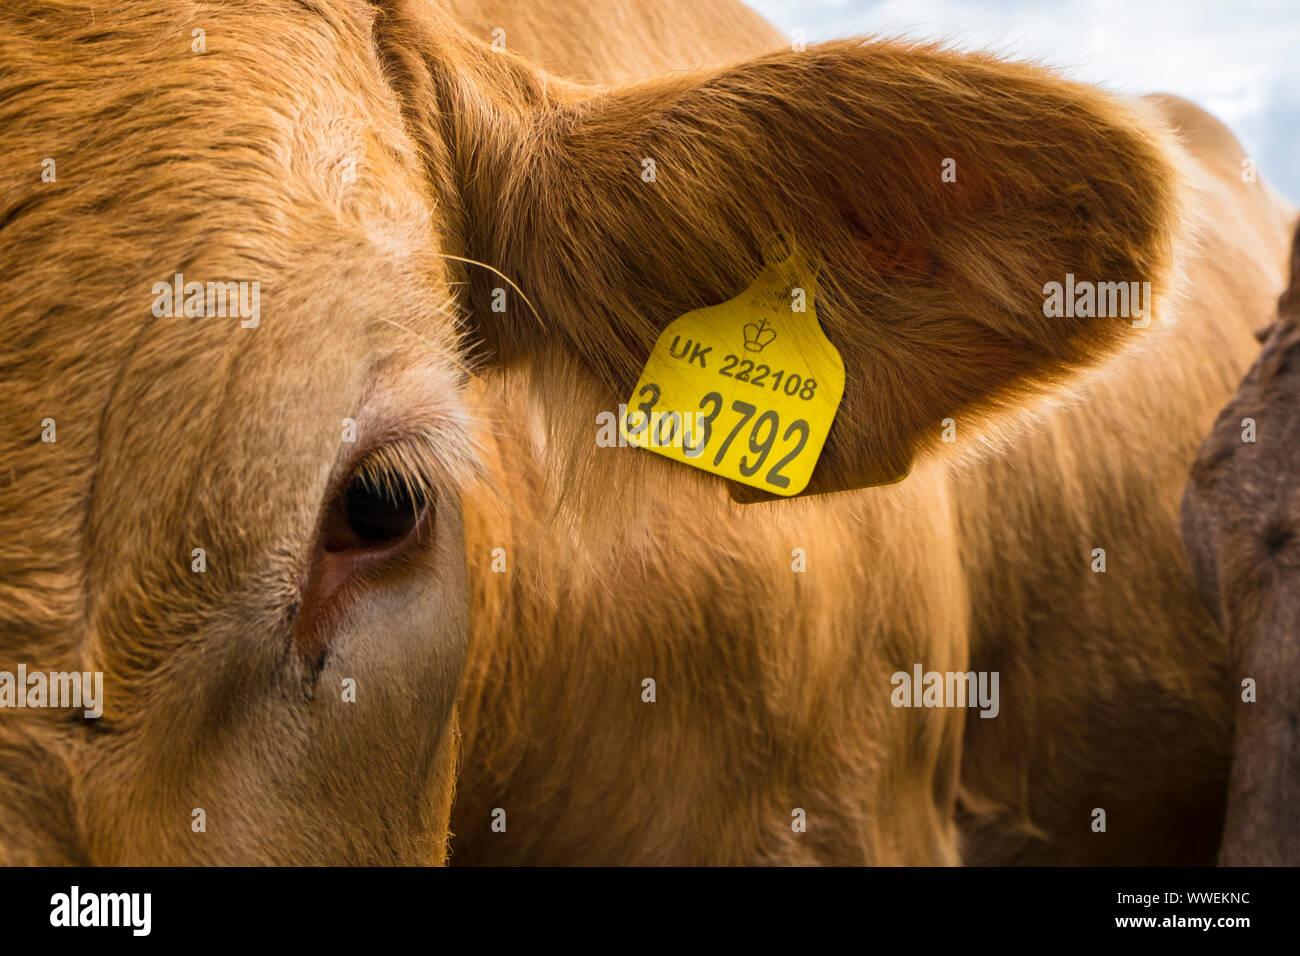 British Beef cattle tagged with a UK tag in the ear. A Suffolk, UK, farm. Stock Photo